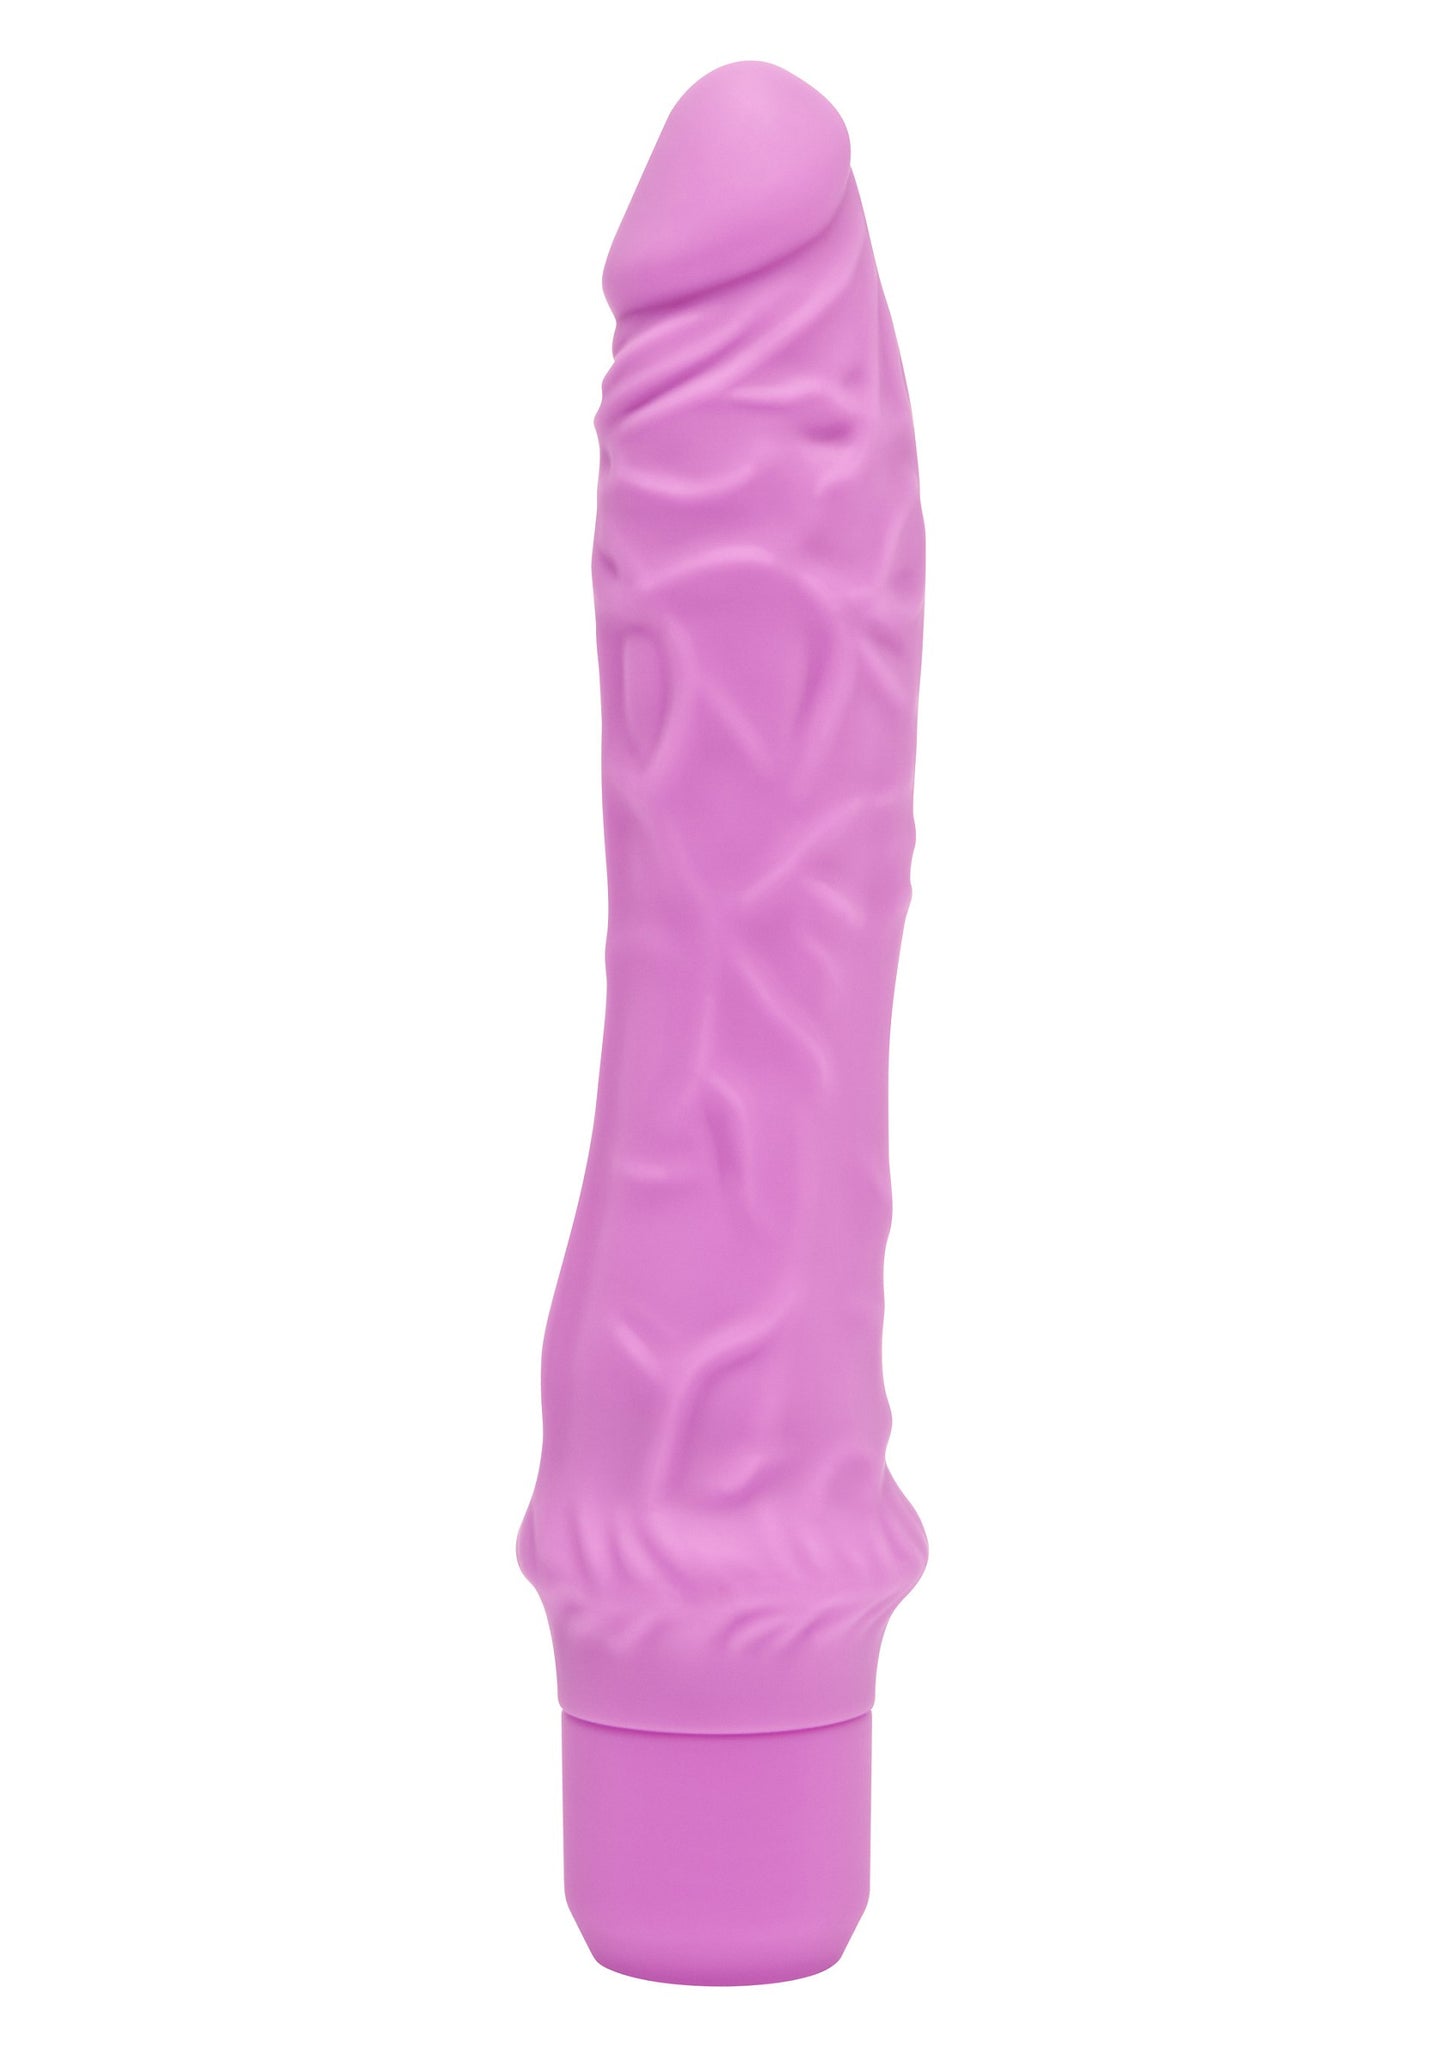 ToyJoy Get Real Classic Large Vibrator PINK - 3